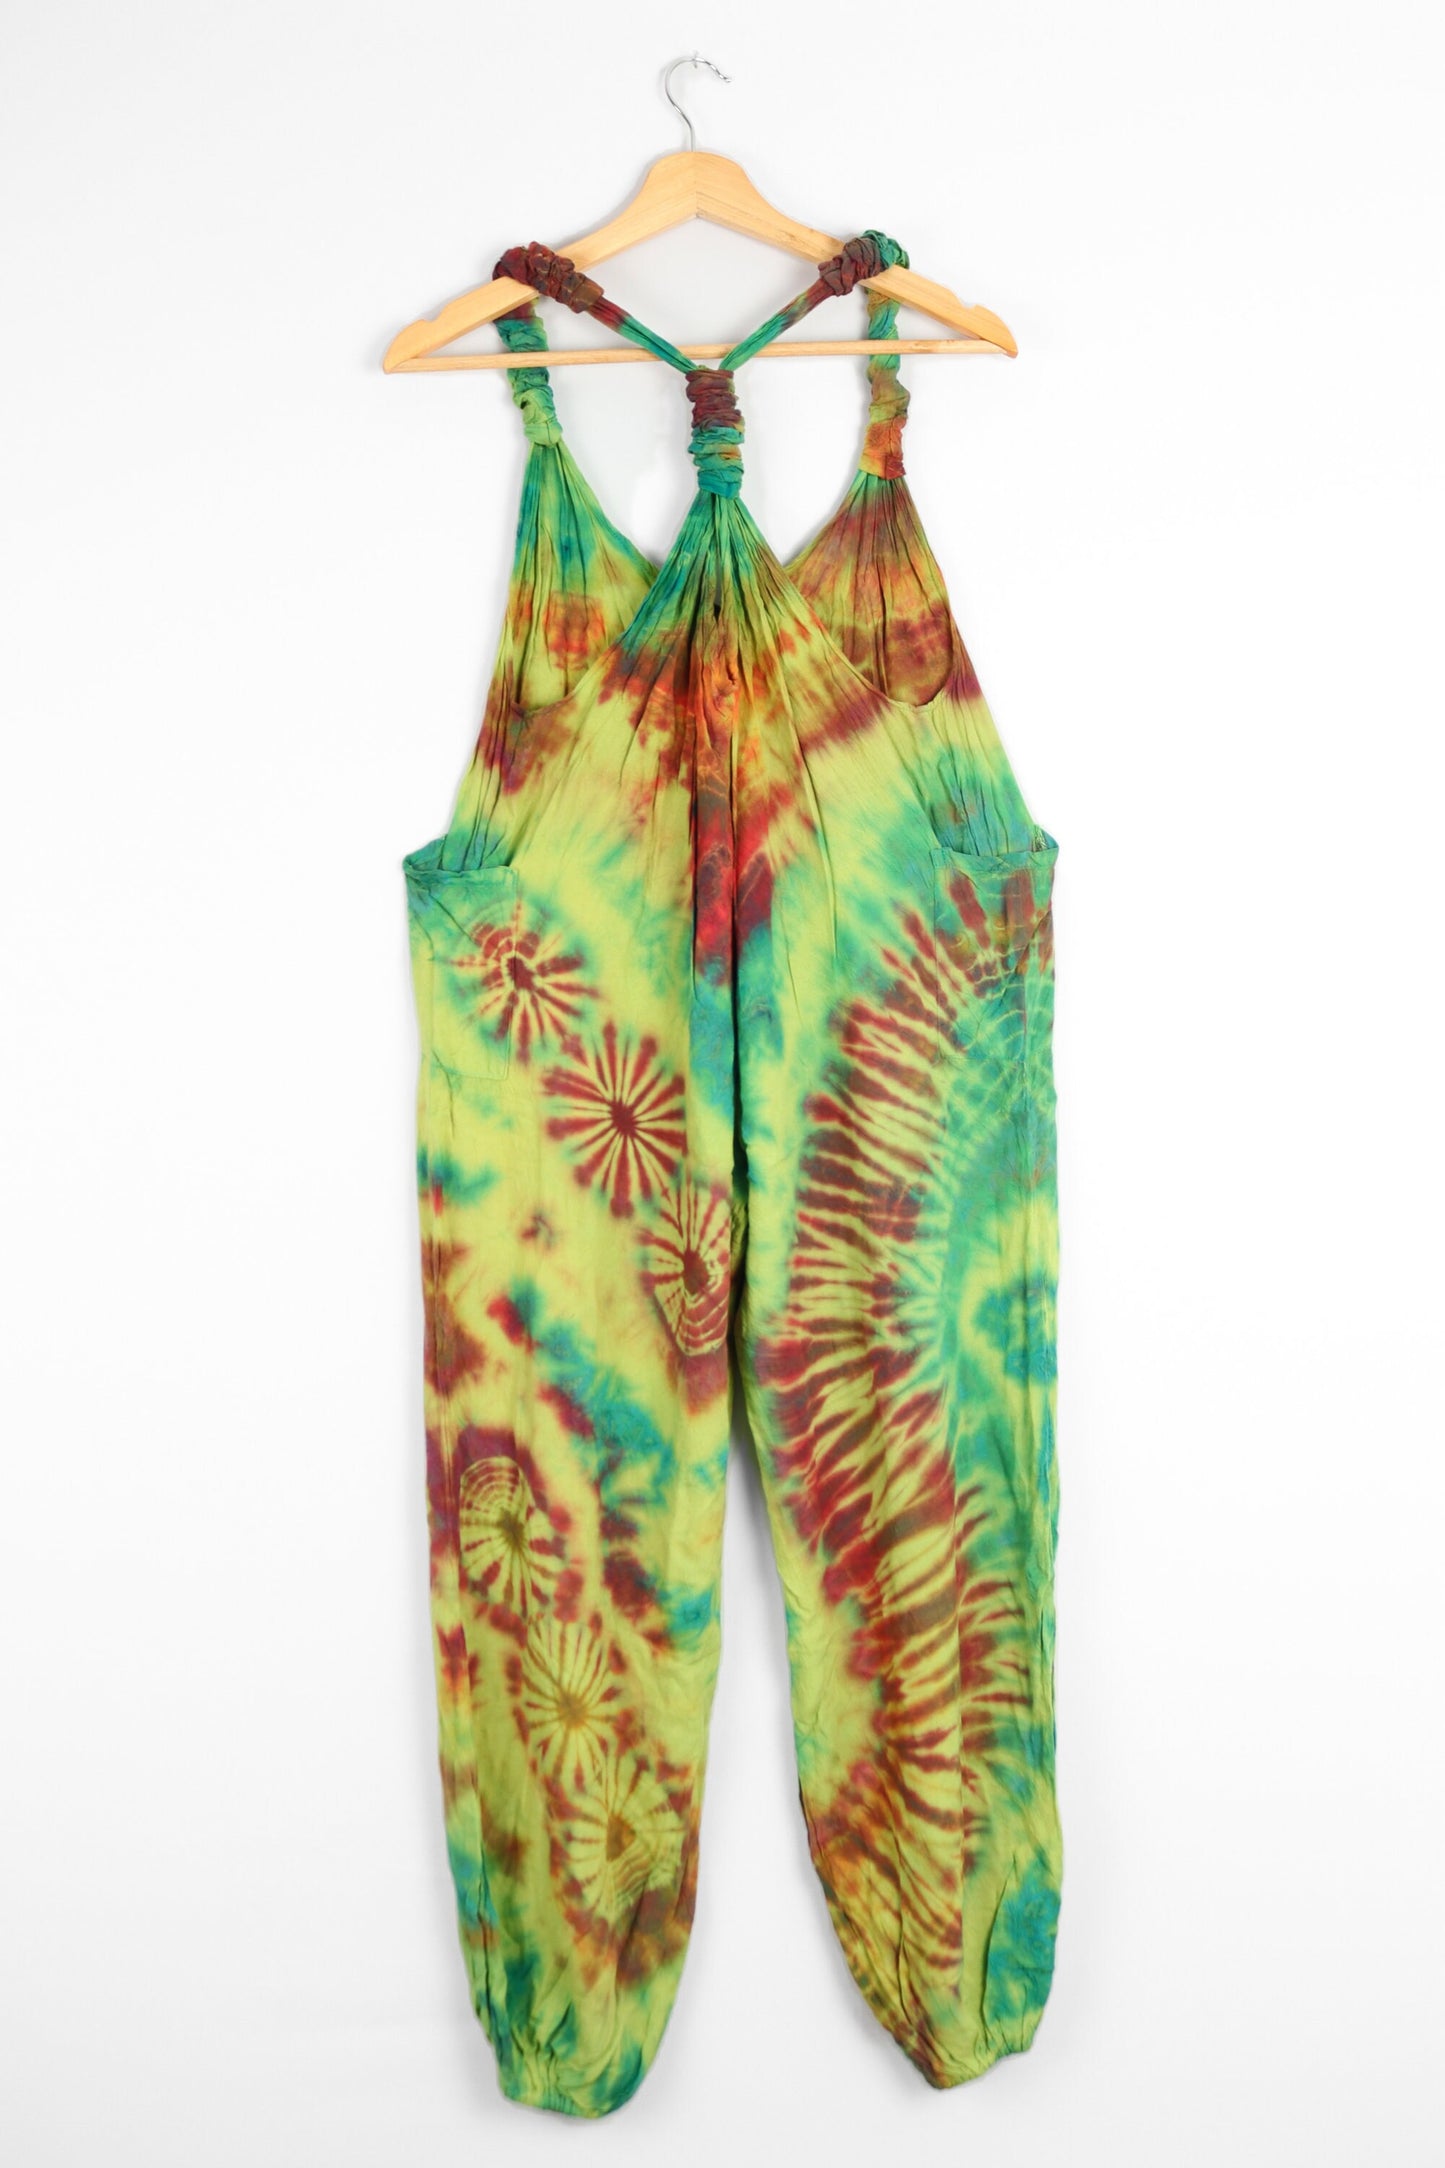 Children's Tie-Dye Dungarees - Lime Green Rainbow Age 3-4, 5-6, 7-8, 9-11,